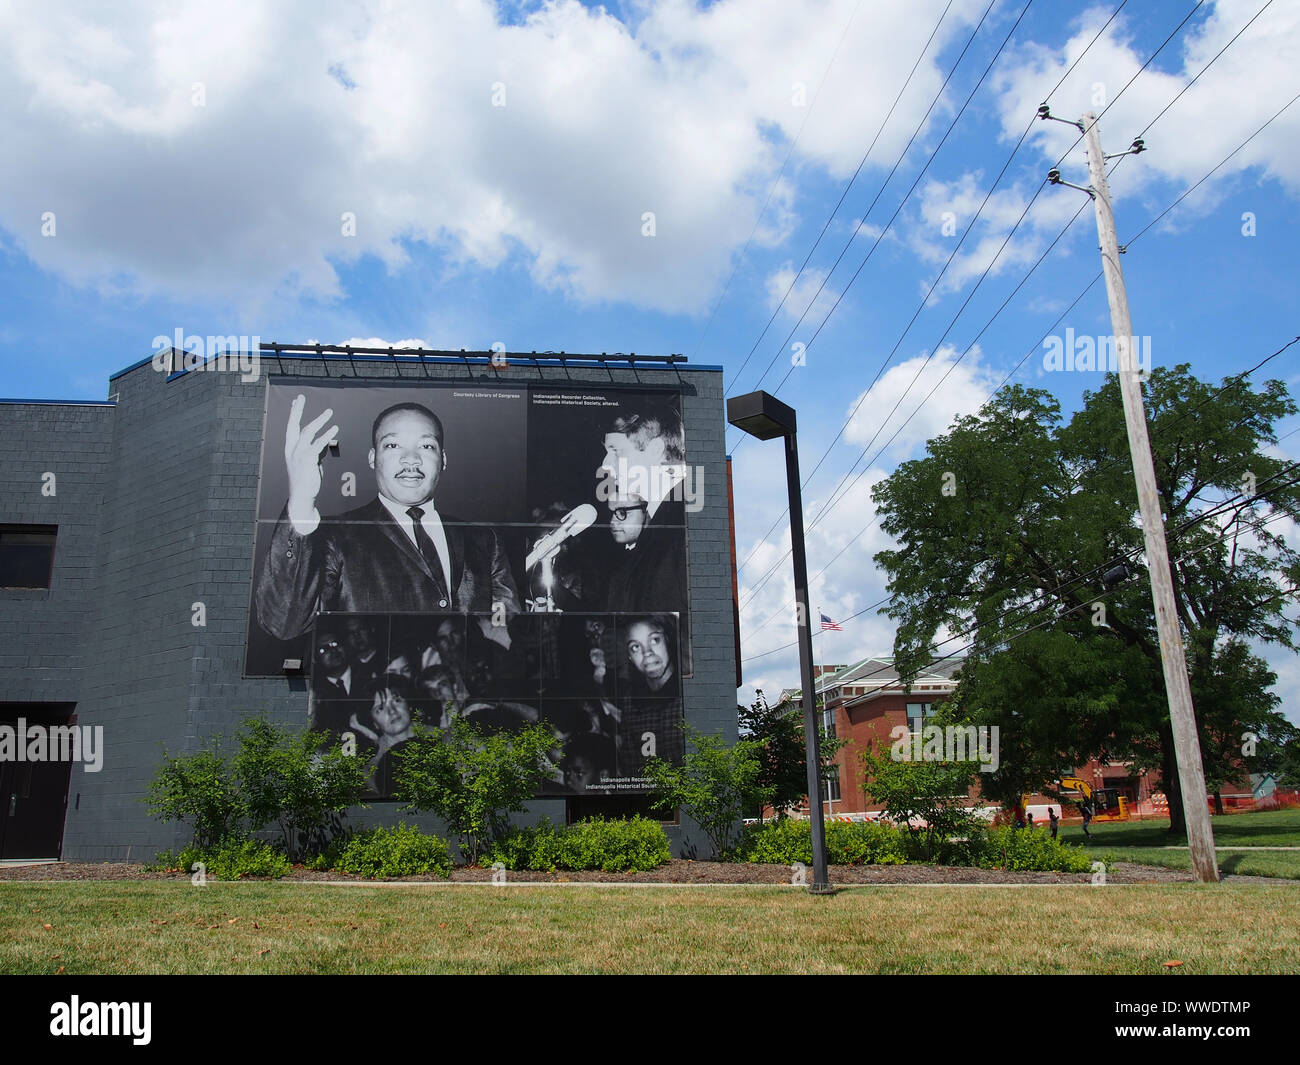 Robert F. Kennedy and Dr. Martin Luther King, Jr. Photo Mural, Indianapolis, Indiana, USA, July 26, 2019, © Katharine Andriotis Stock Photo